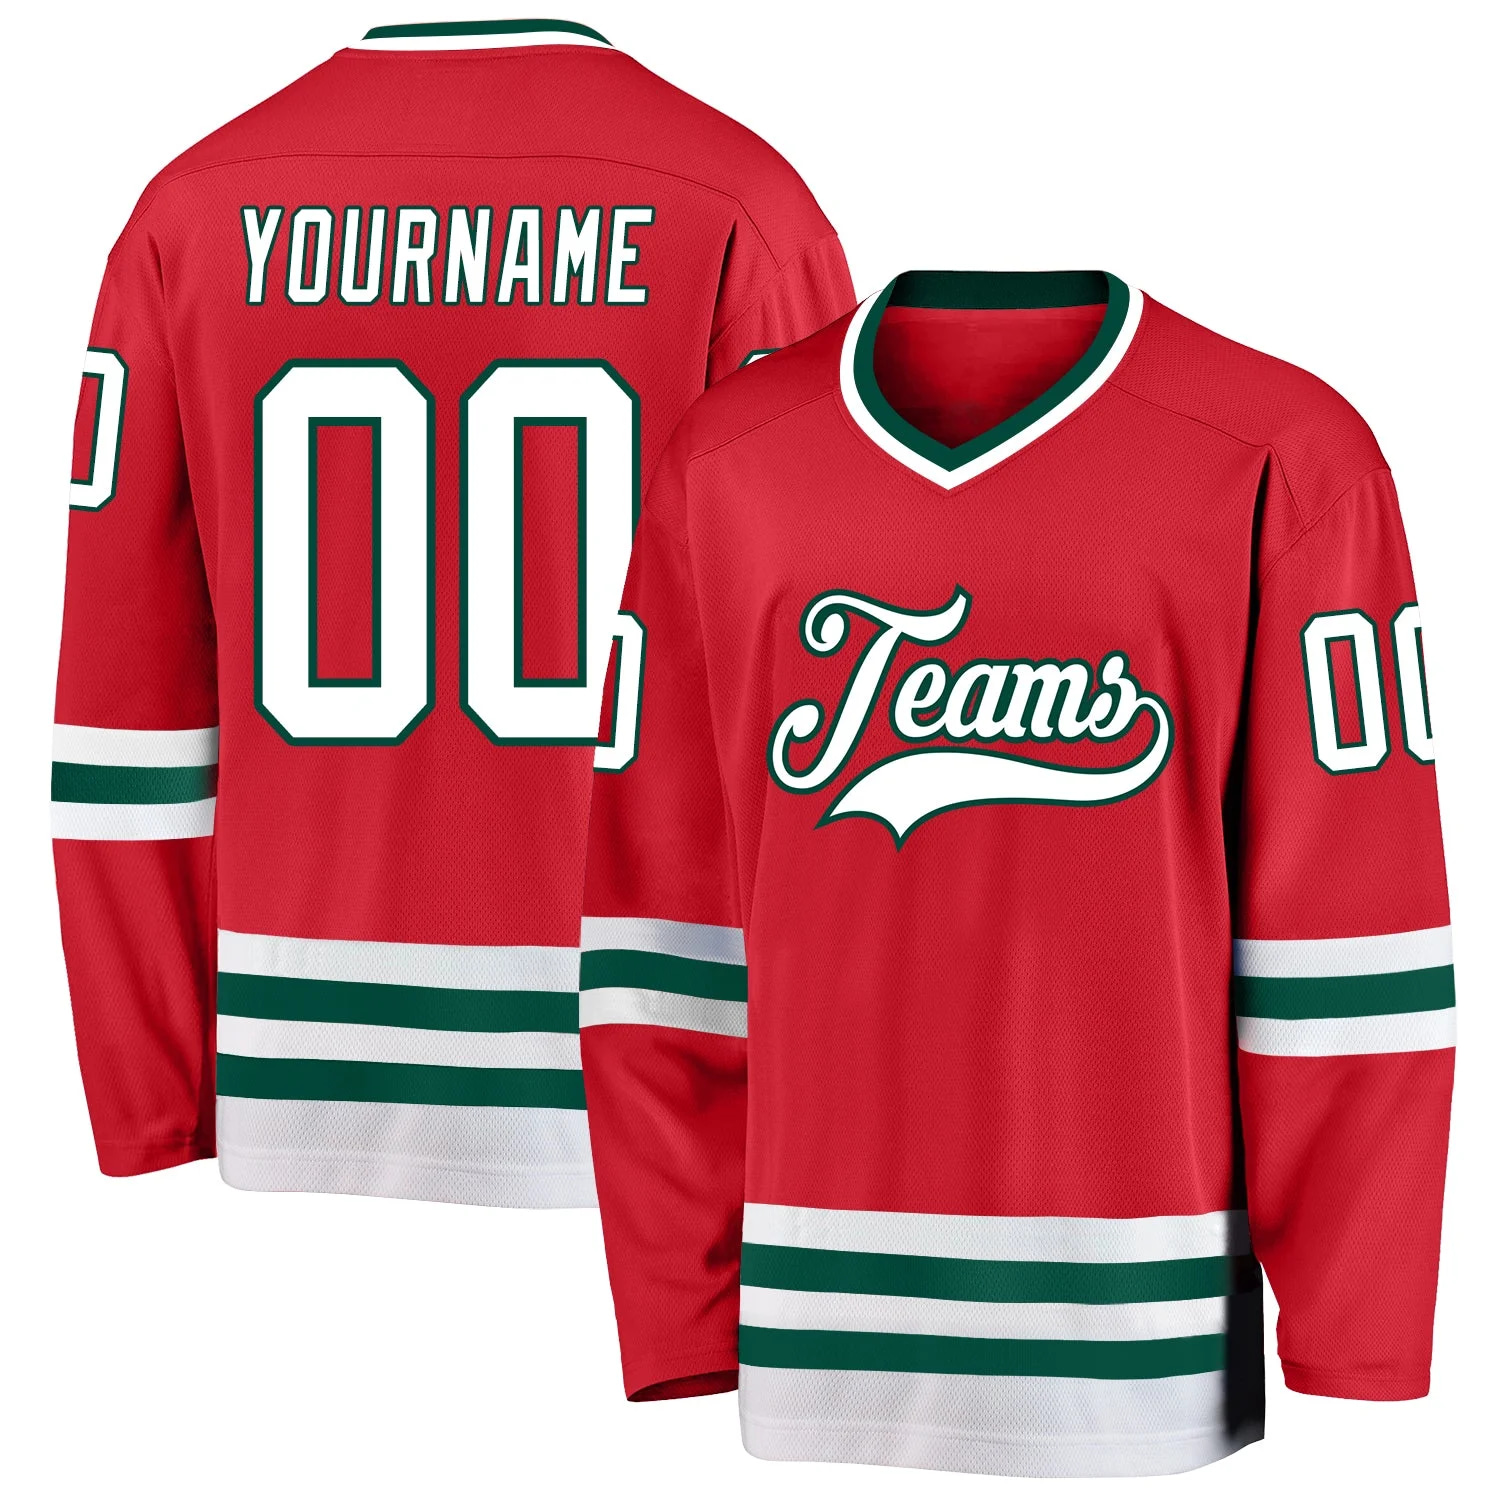 Stitched And Print Red White-green Hockey Jersey Custom